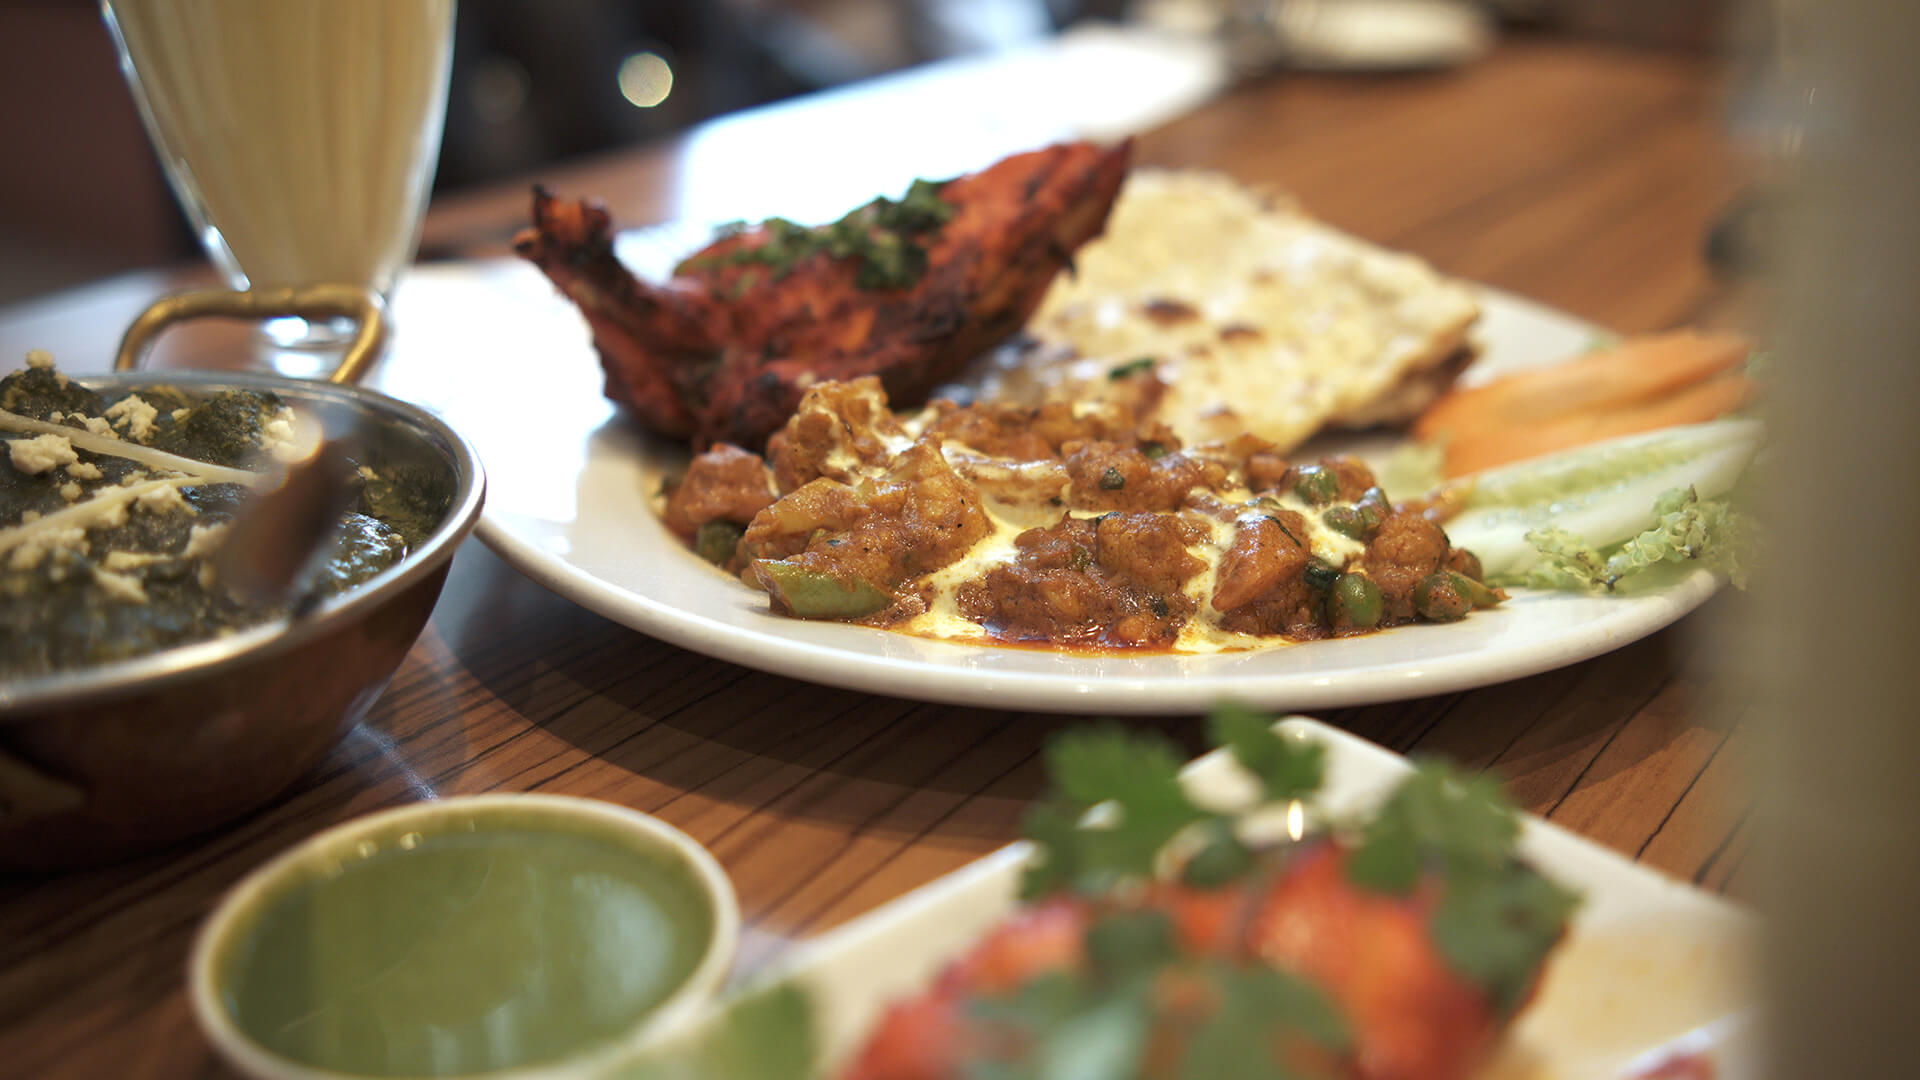 It tastes so good you’re eating naan-stop!